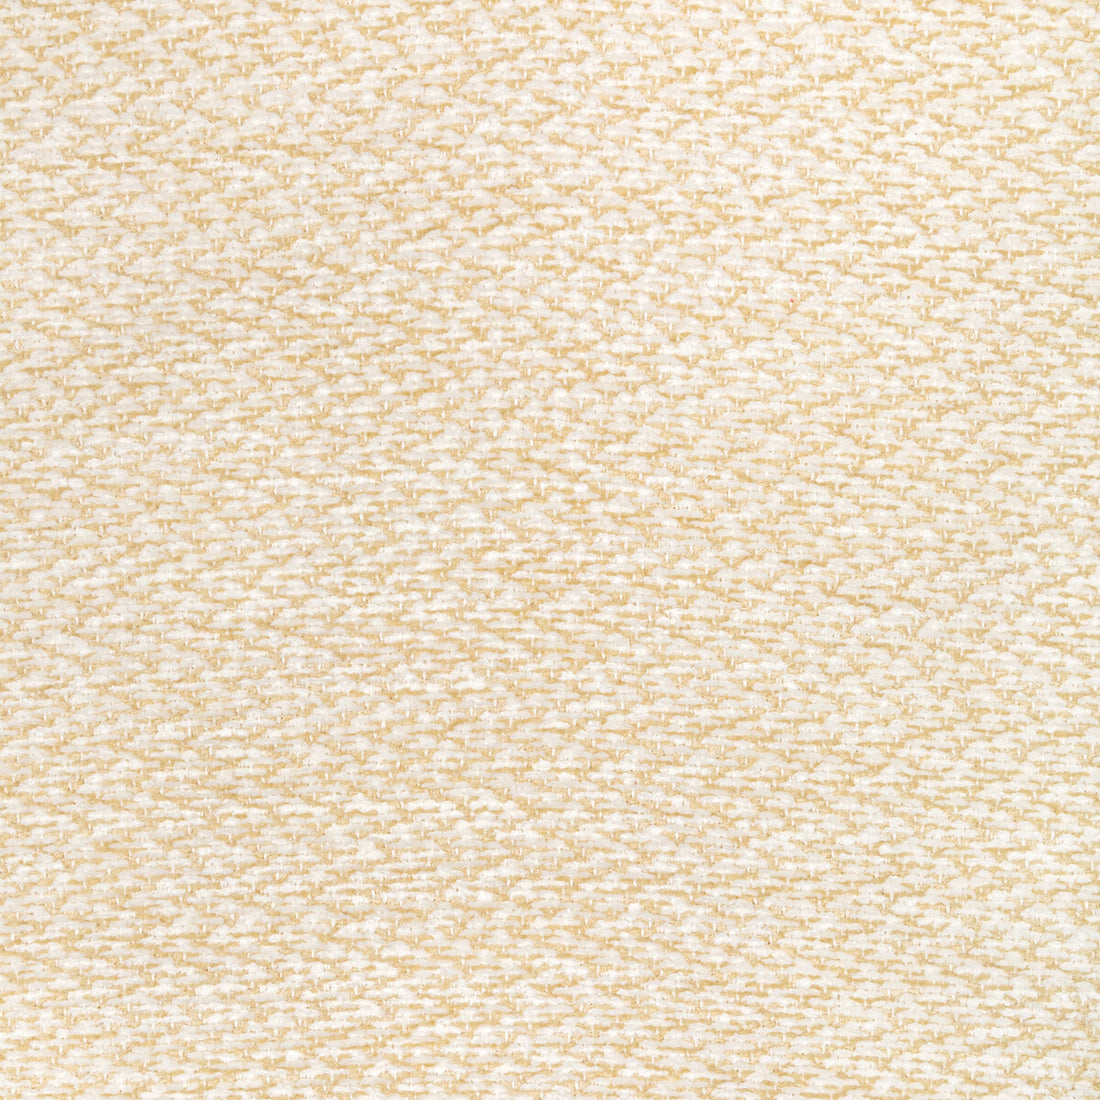 Sasson Texture fabric in cream color - pattern 8022122.1116.0 - by Brunschwig &amp; Fils in the Chambery Textures III collection